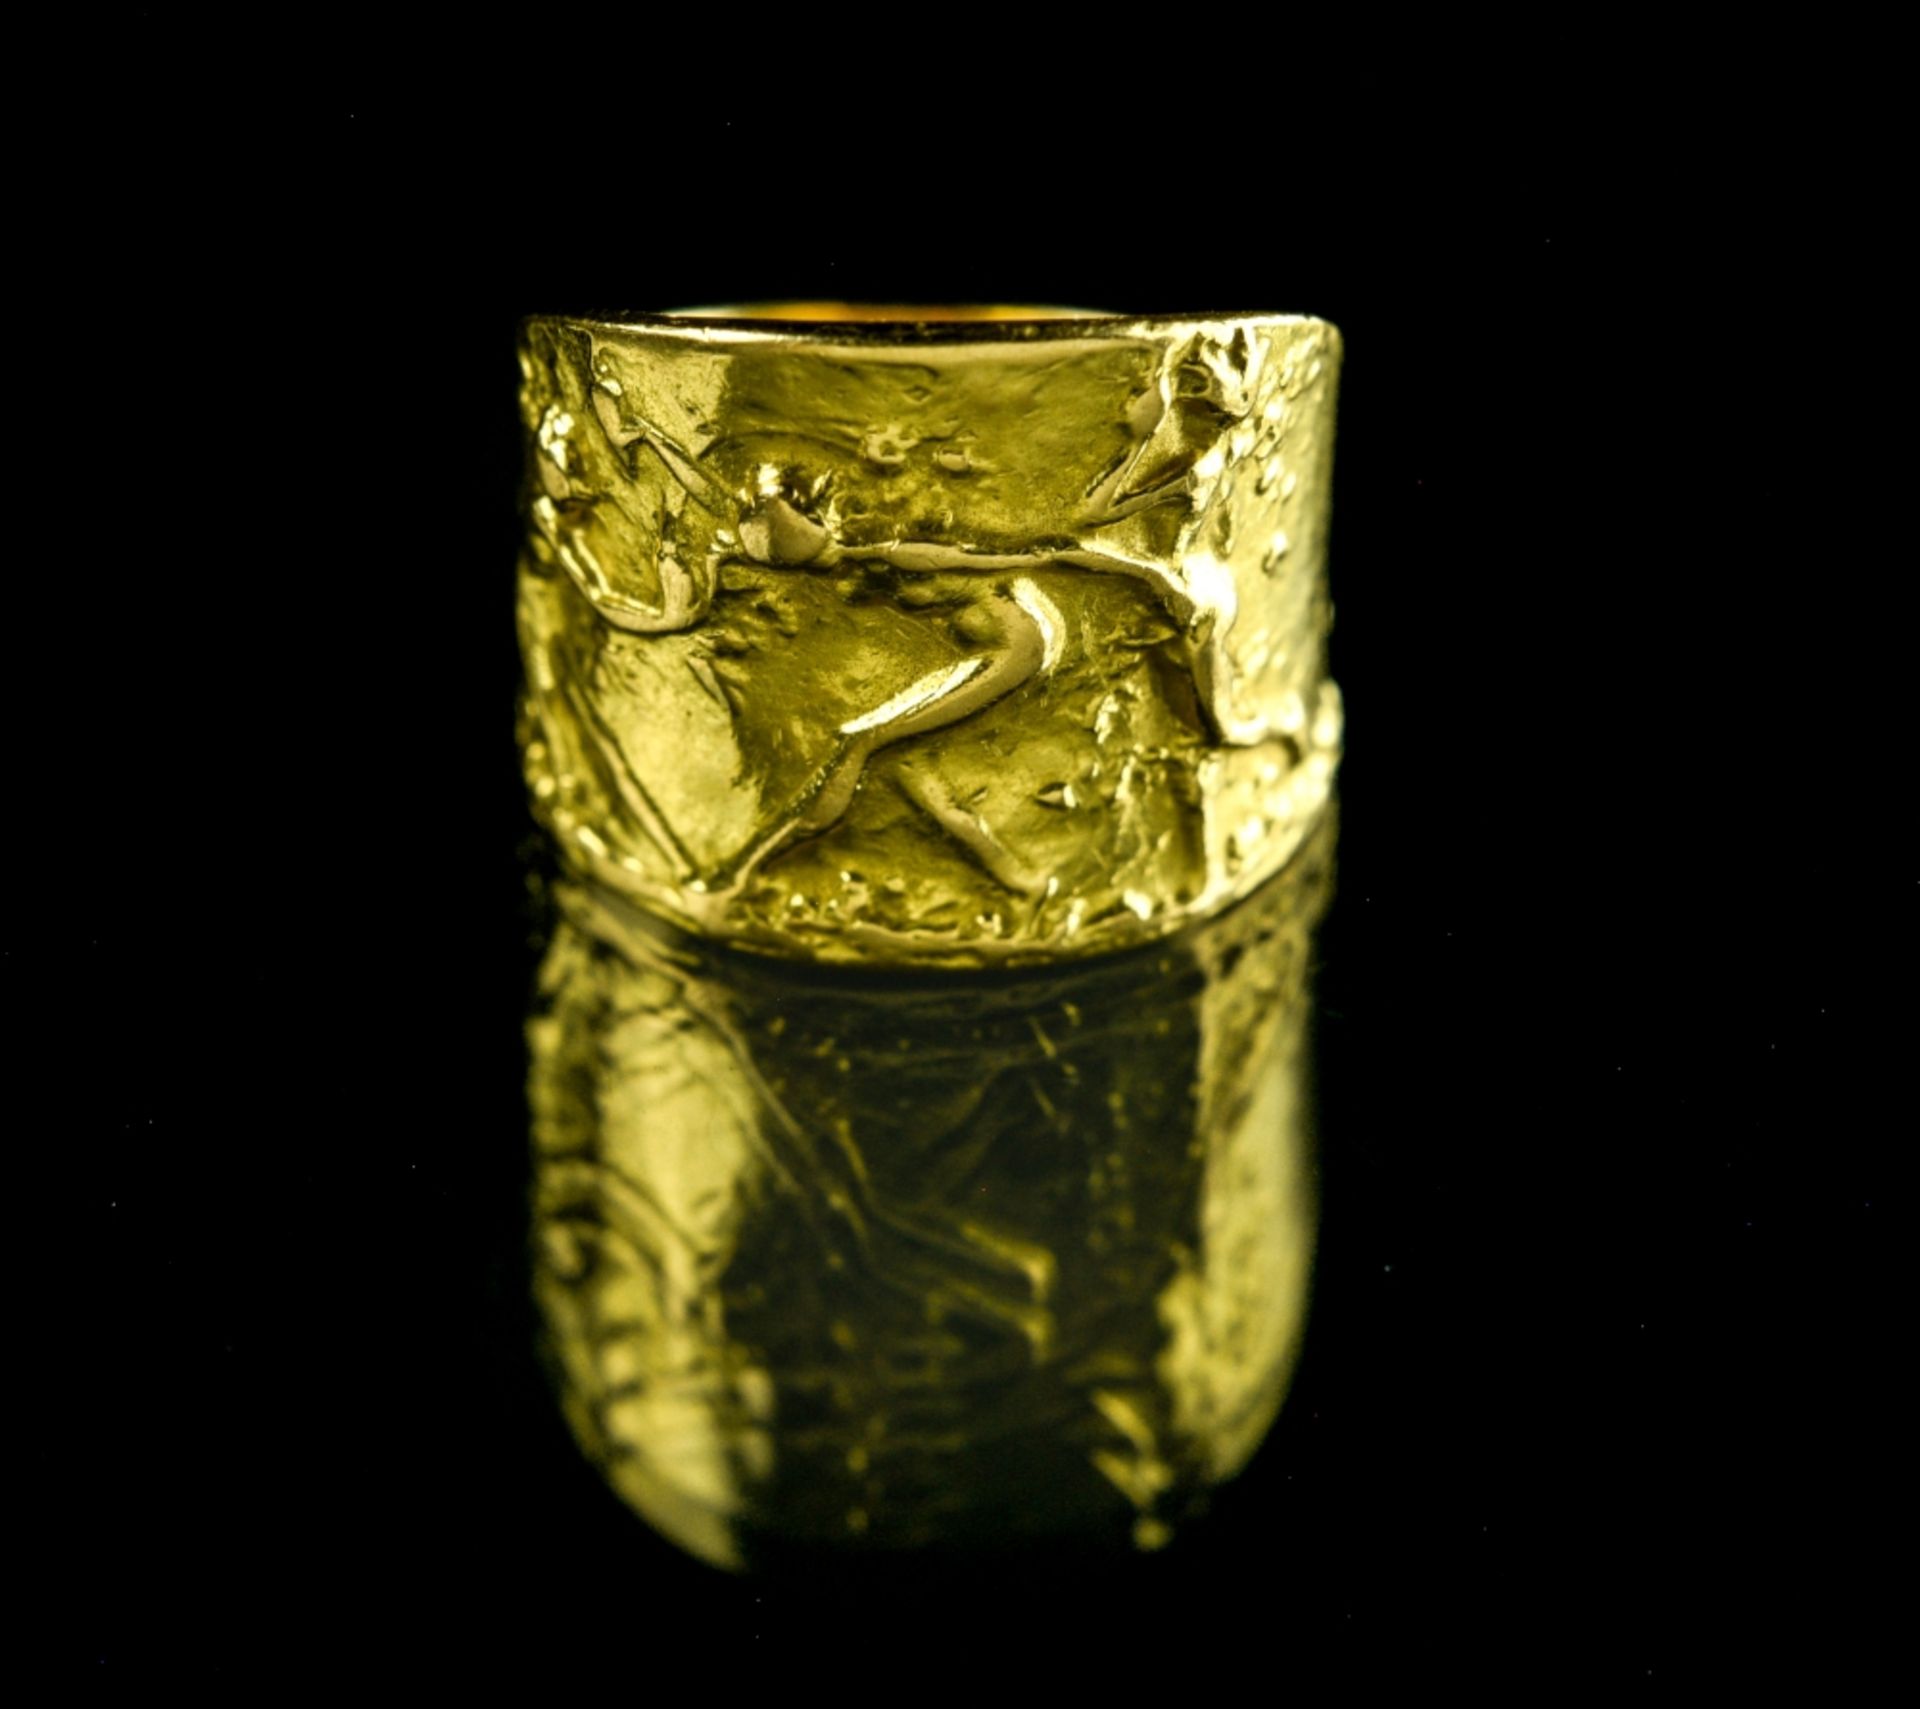 LALIQUE "Bacchanale" bangle 18 kt yellow gold, signed LALIQUE. Ring size: 60 Hallmark: RL in a